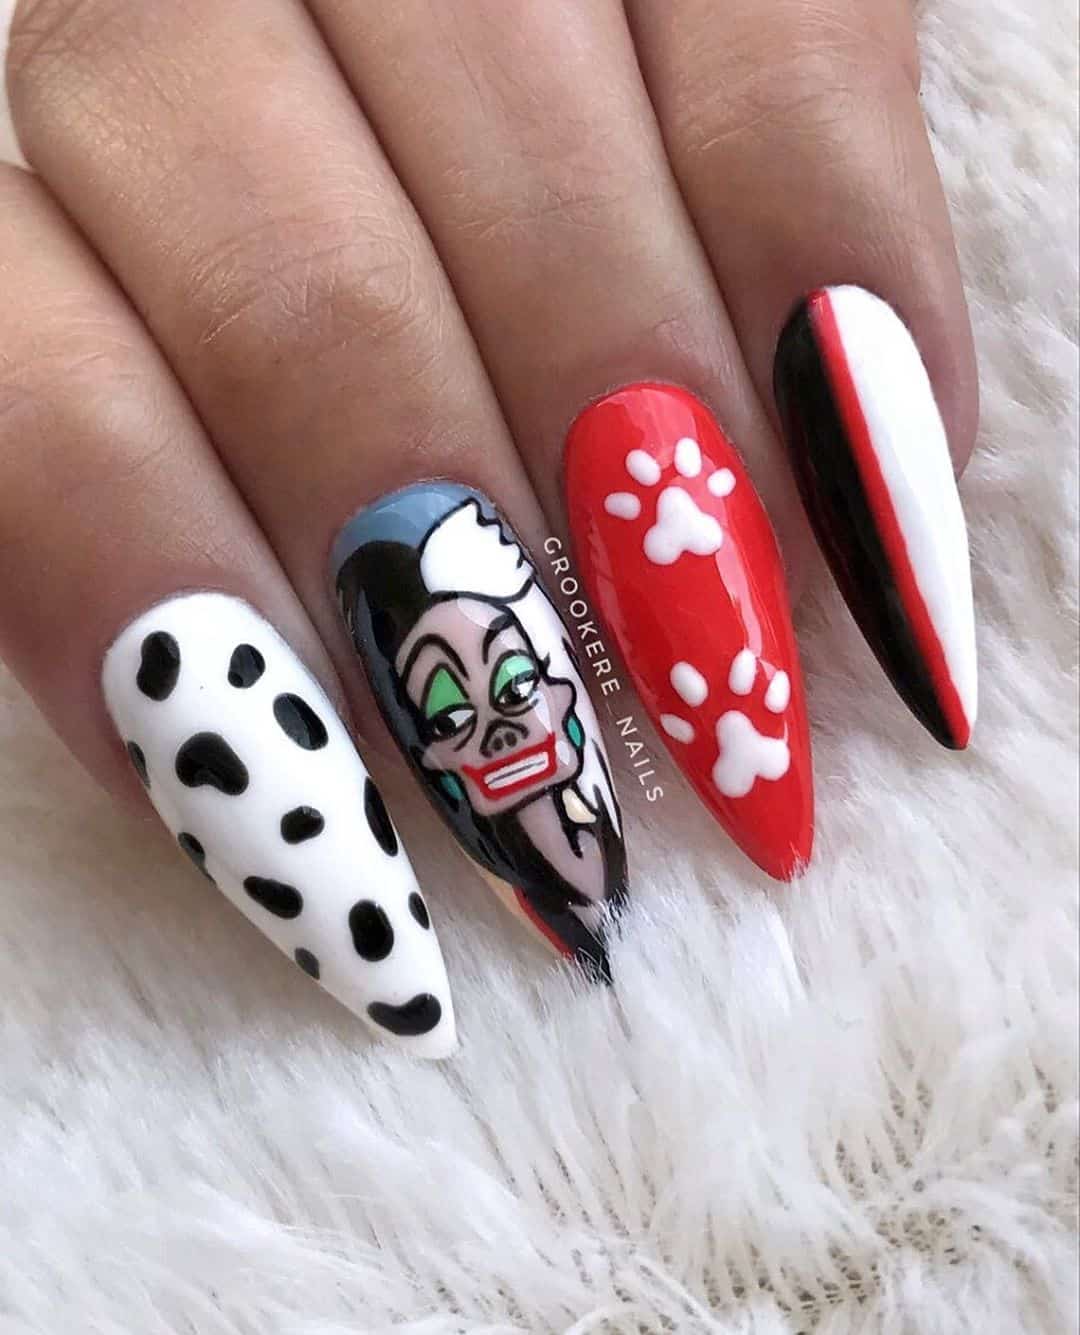 Amazing Pointed Nail Design to Have and Cherish - Cartoon Designs